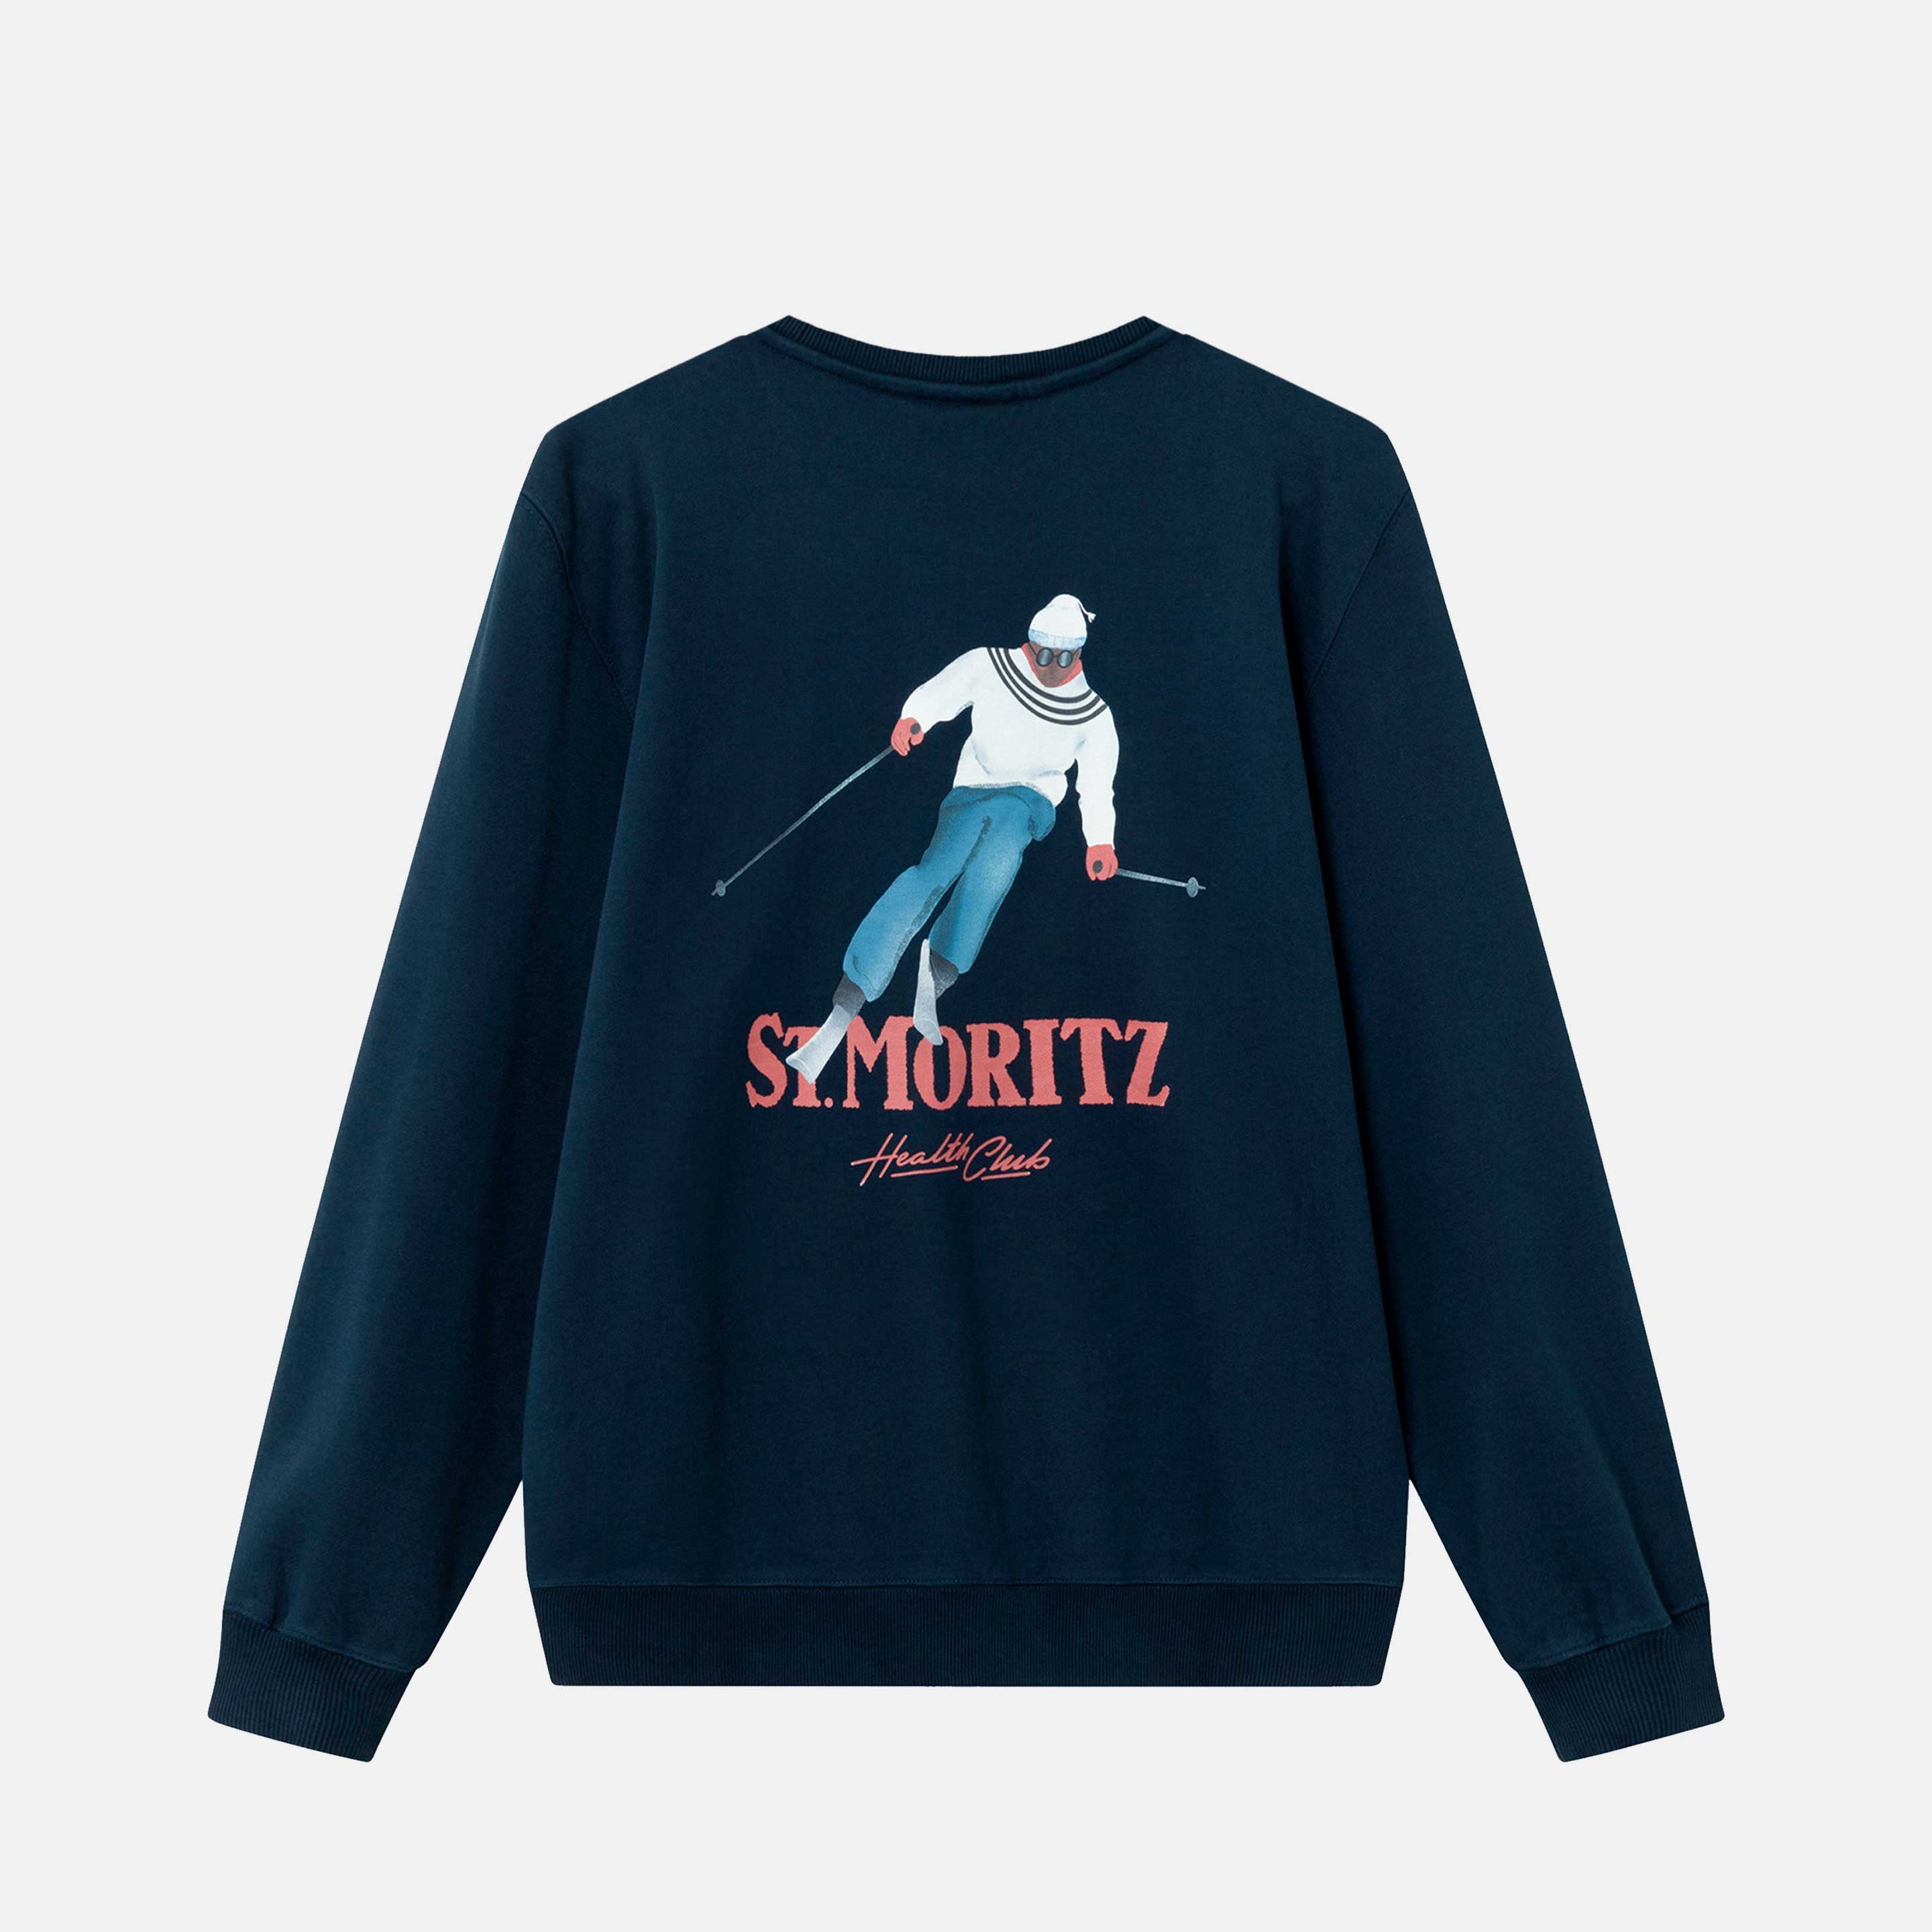 Back view of a navy sweatshirt with skier and red text print.